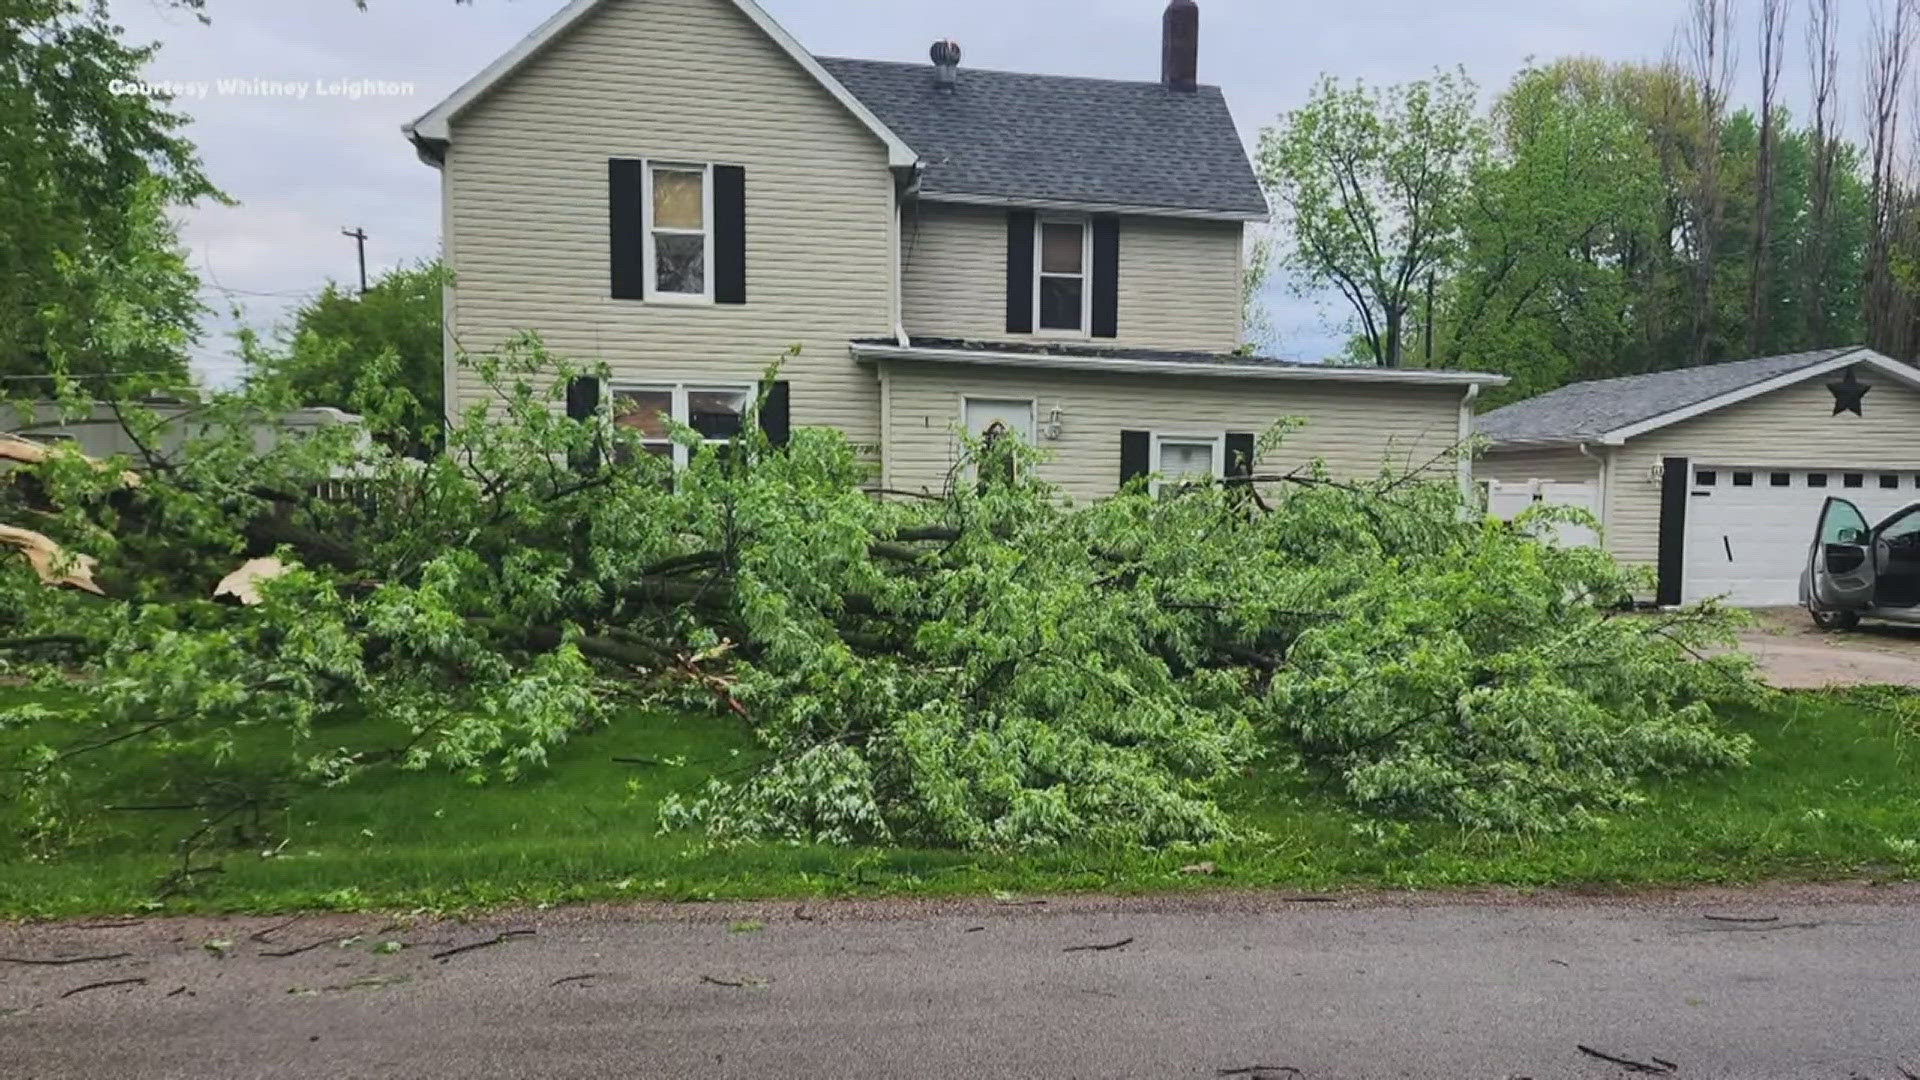 Prairie City is about 30 minutes away from Des Moines and was hit by an EF-0 tornado Tuesday. Some are saying the sirens need to be louder to better warn people.